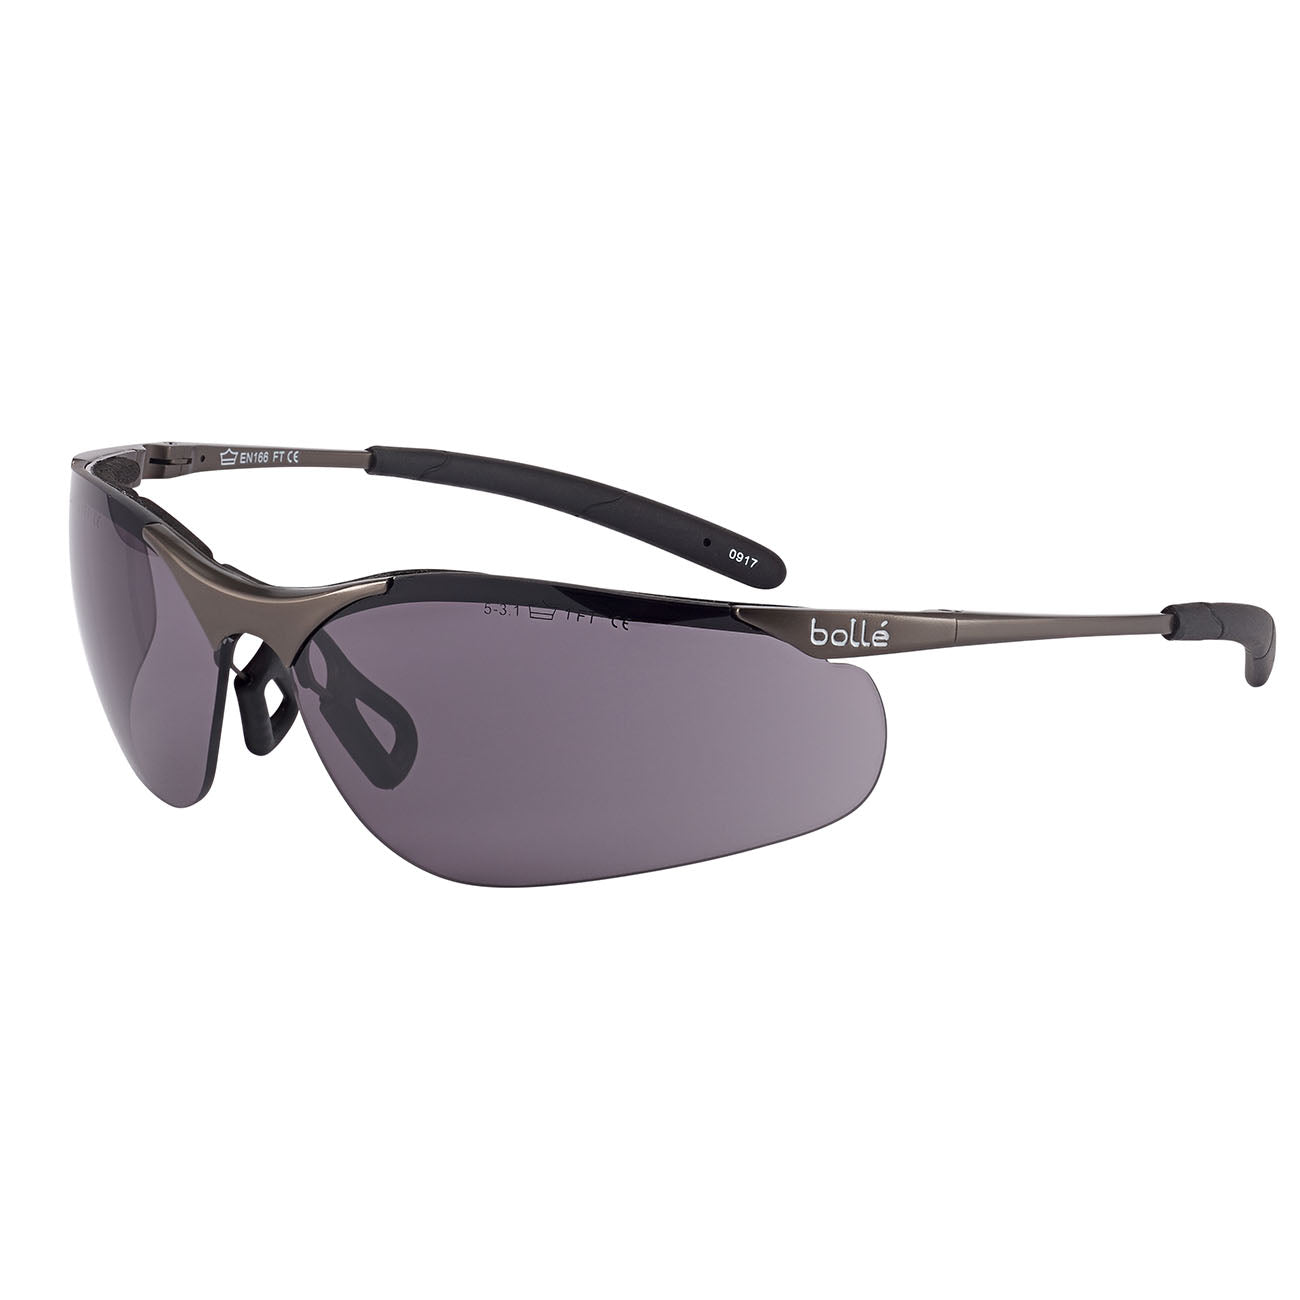 Bolle CONTOUR METAL CONTMPSF Safety Glasses Smoke Lens